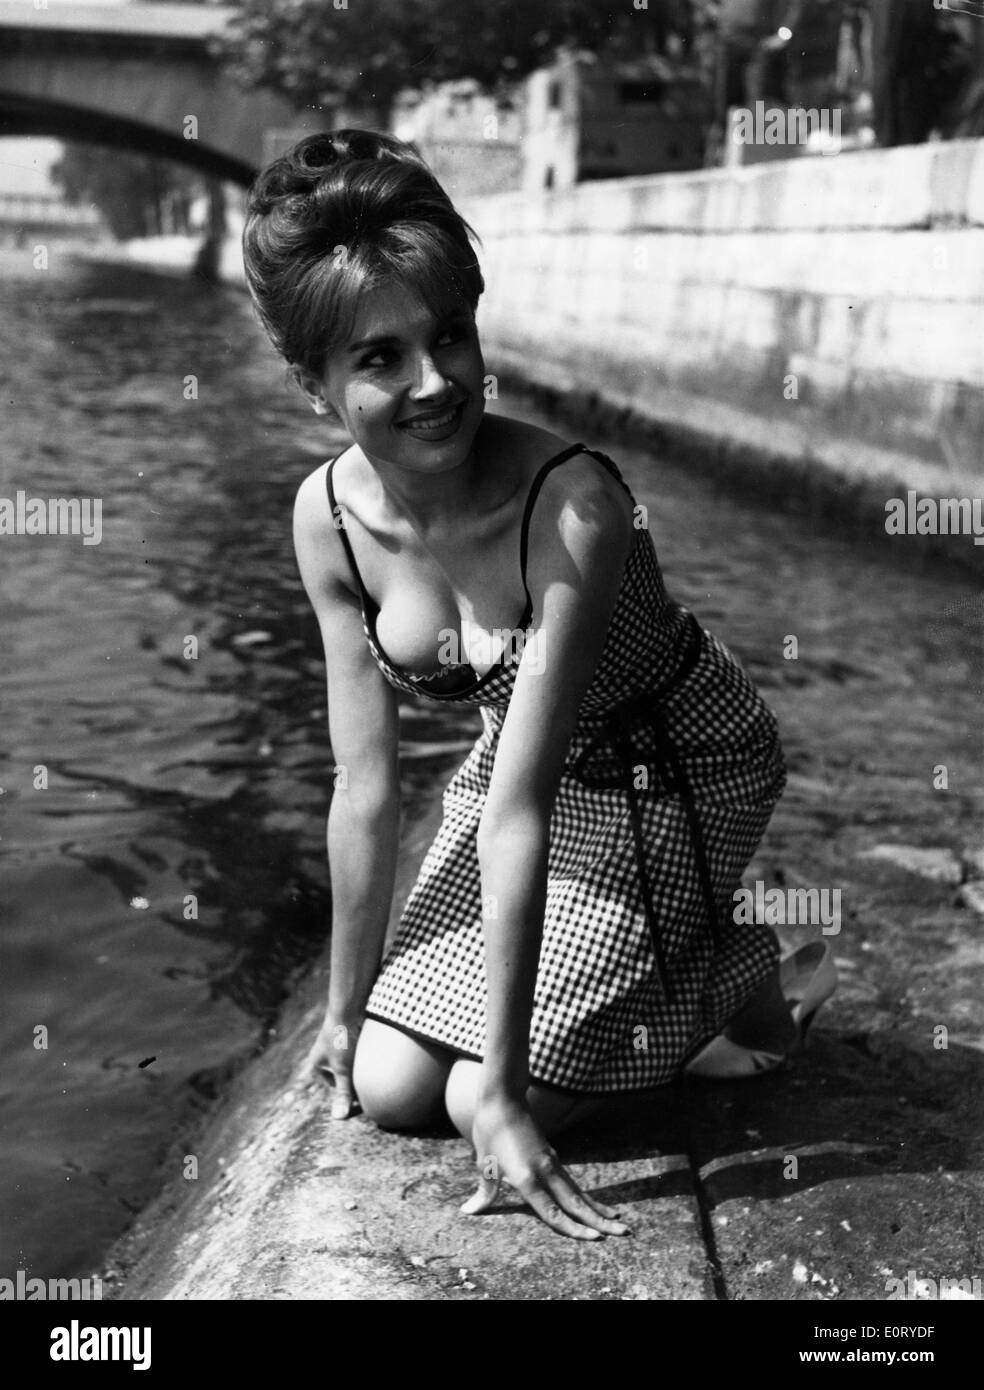 Actress Valerie la Grange sitting down by the river Stock Photo